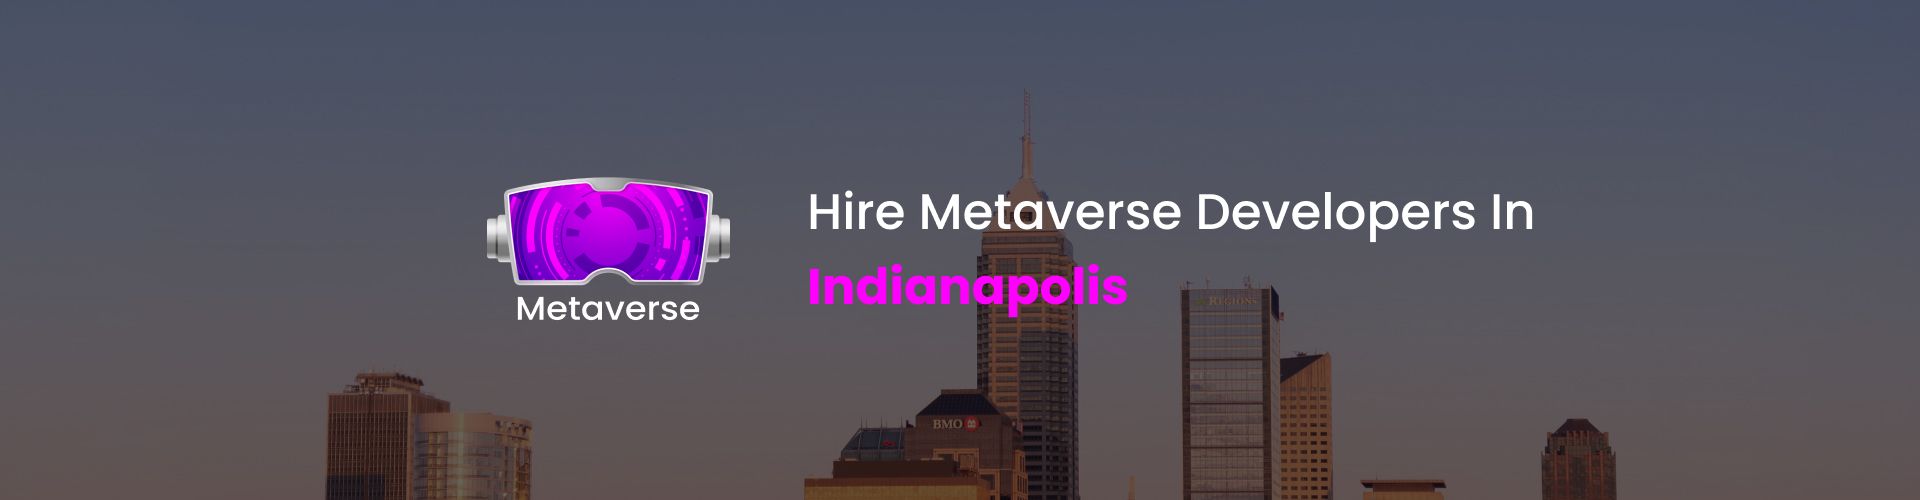 metaverse developers in indianapolis